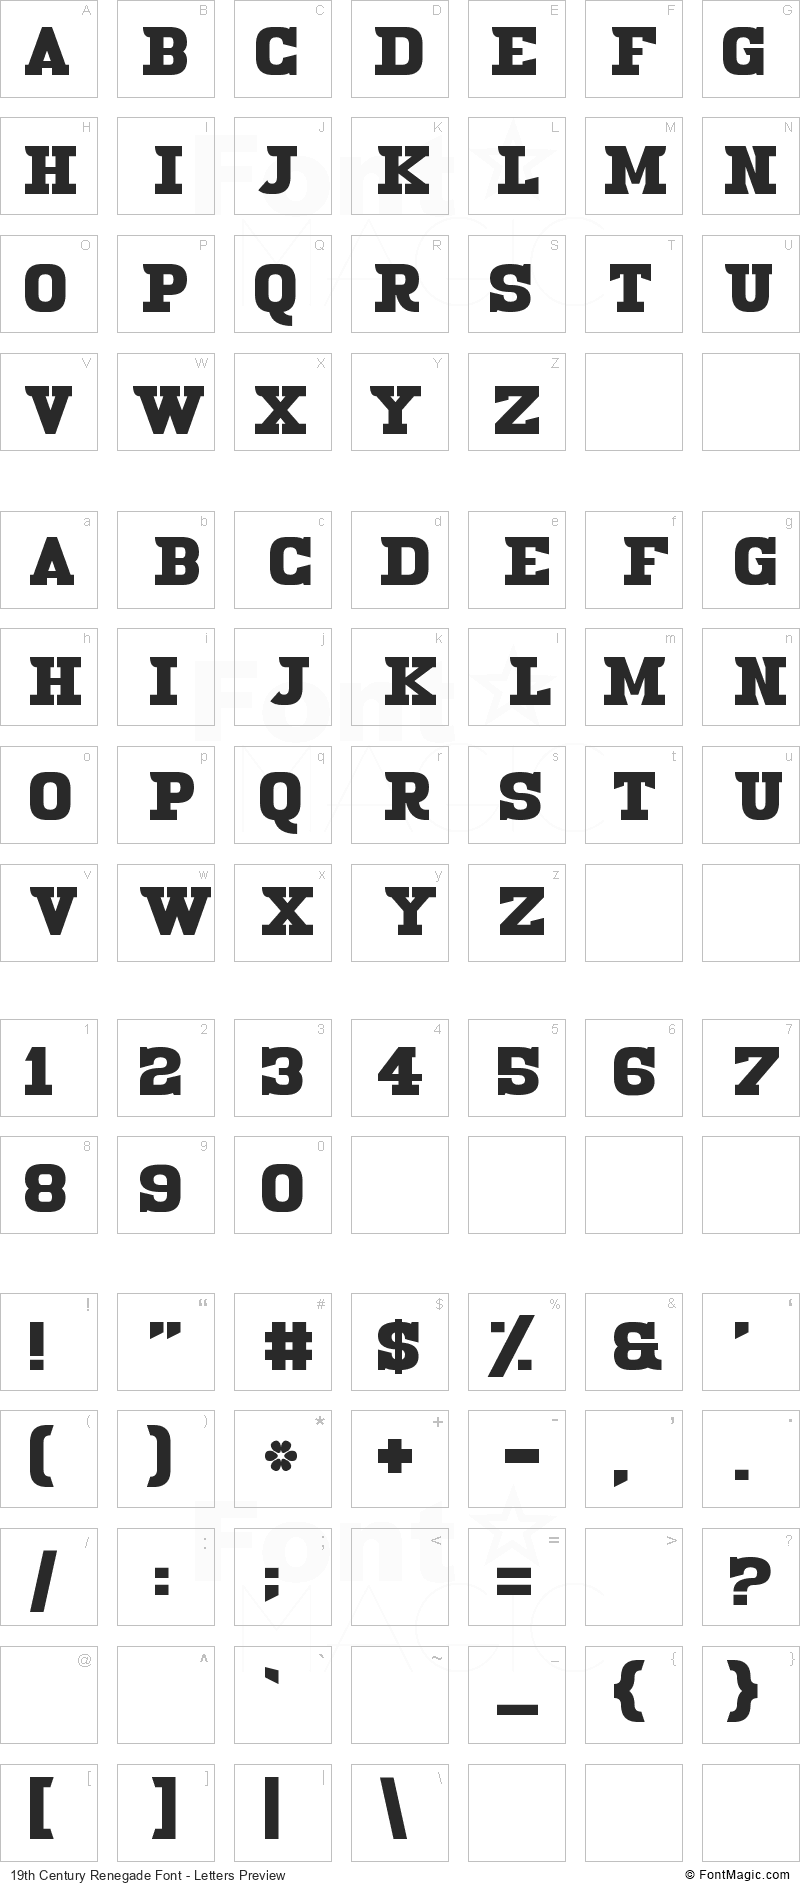 19th Century Renegade Font - All Latters Preview Chart